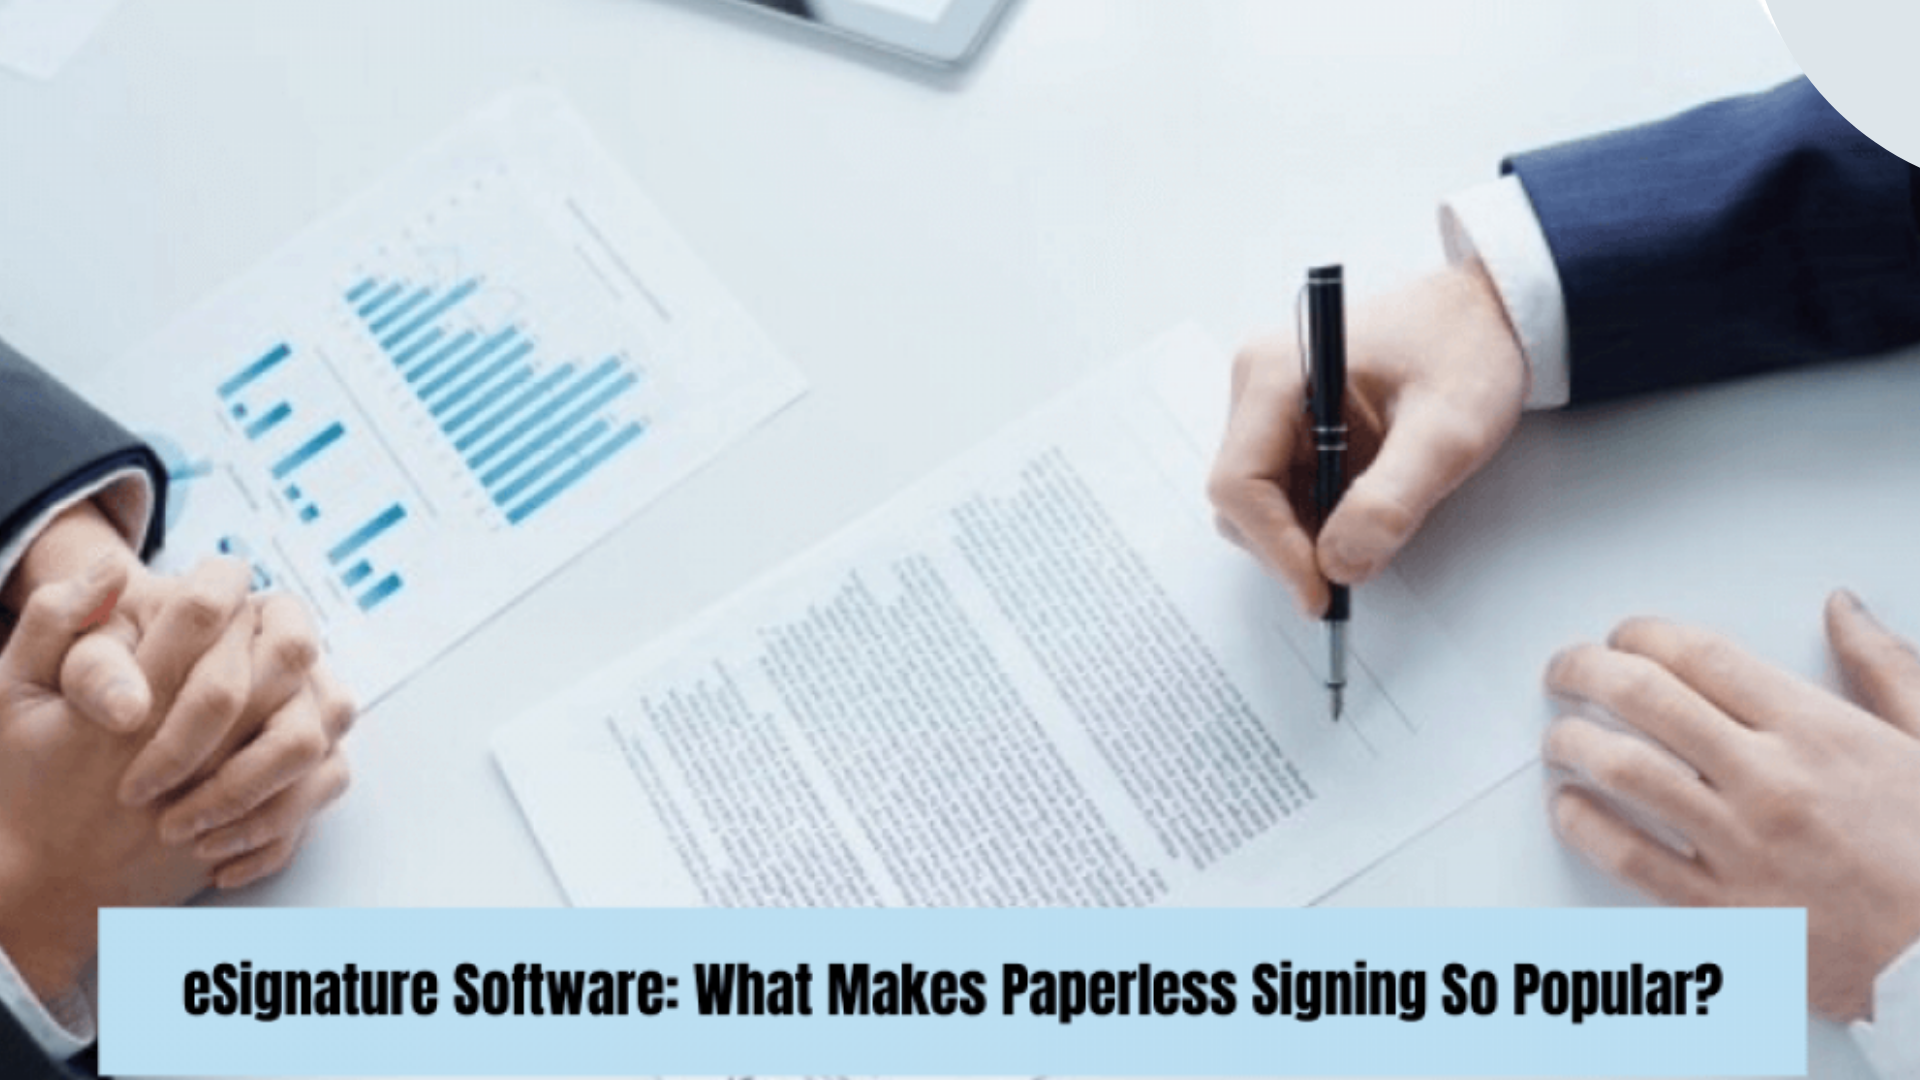 eSignature Software: What Makes Paperless Signing So Popular?